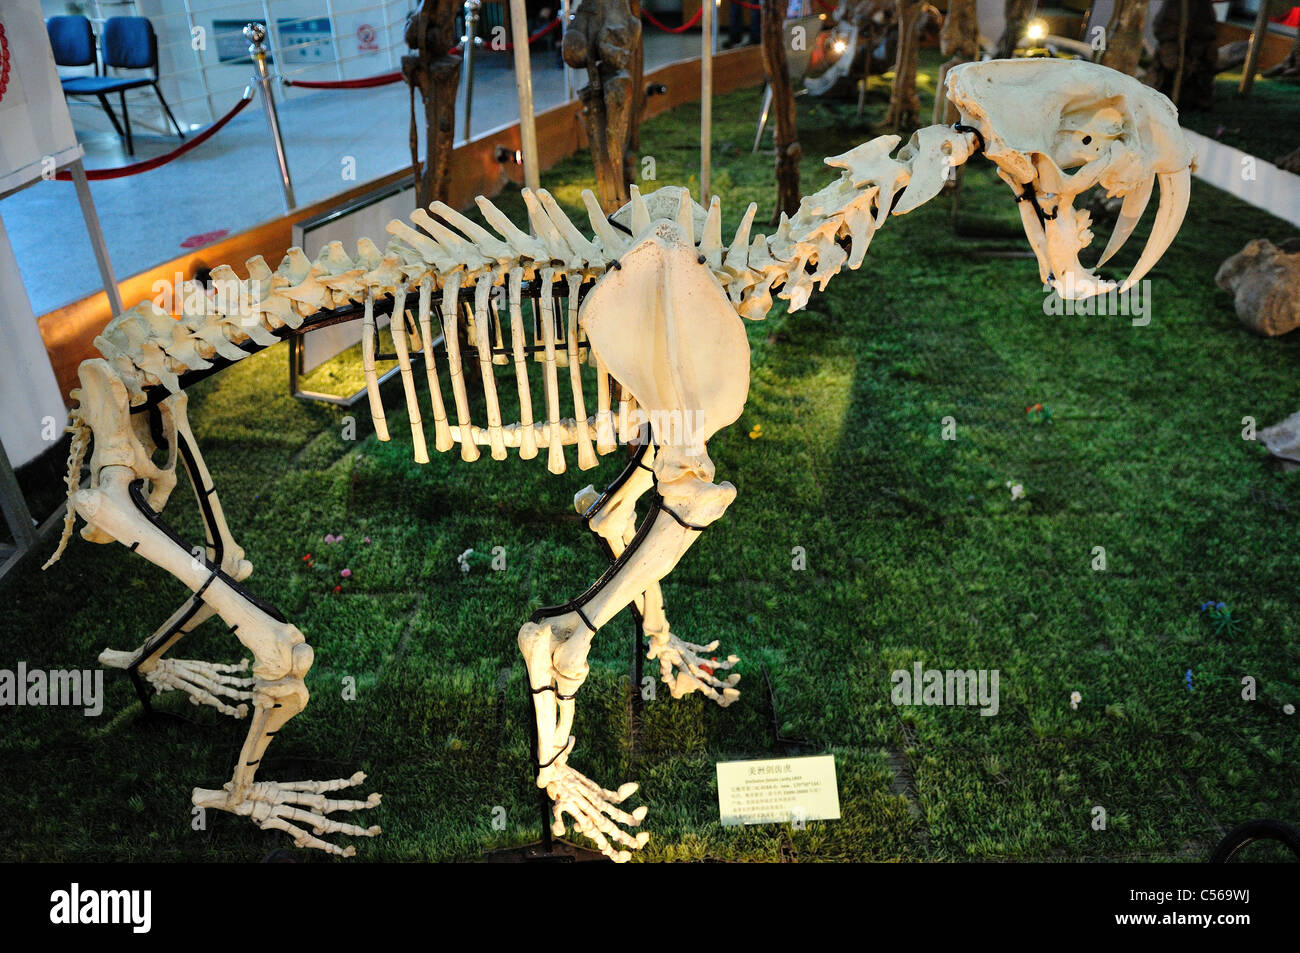 Skeleton of a saber-toothed tiger. Beijing, China. Stock Photo